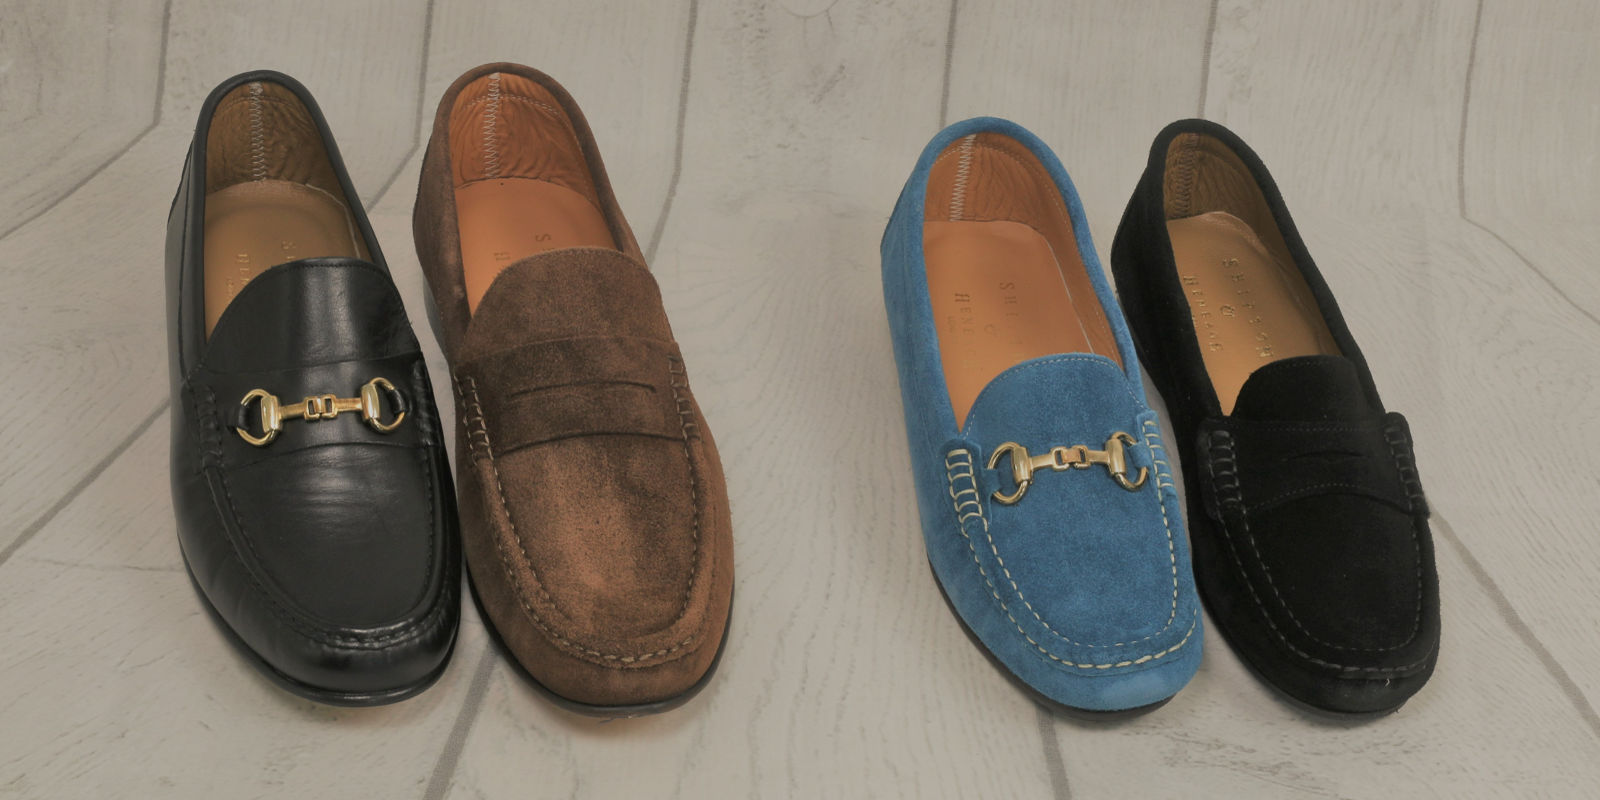 Shipton  Heneage Finest Formal and Casual Footwear from UK